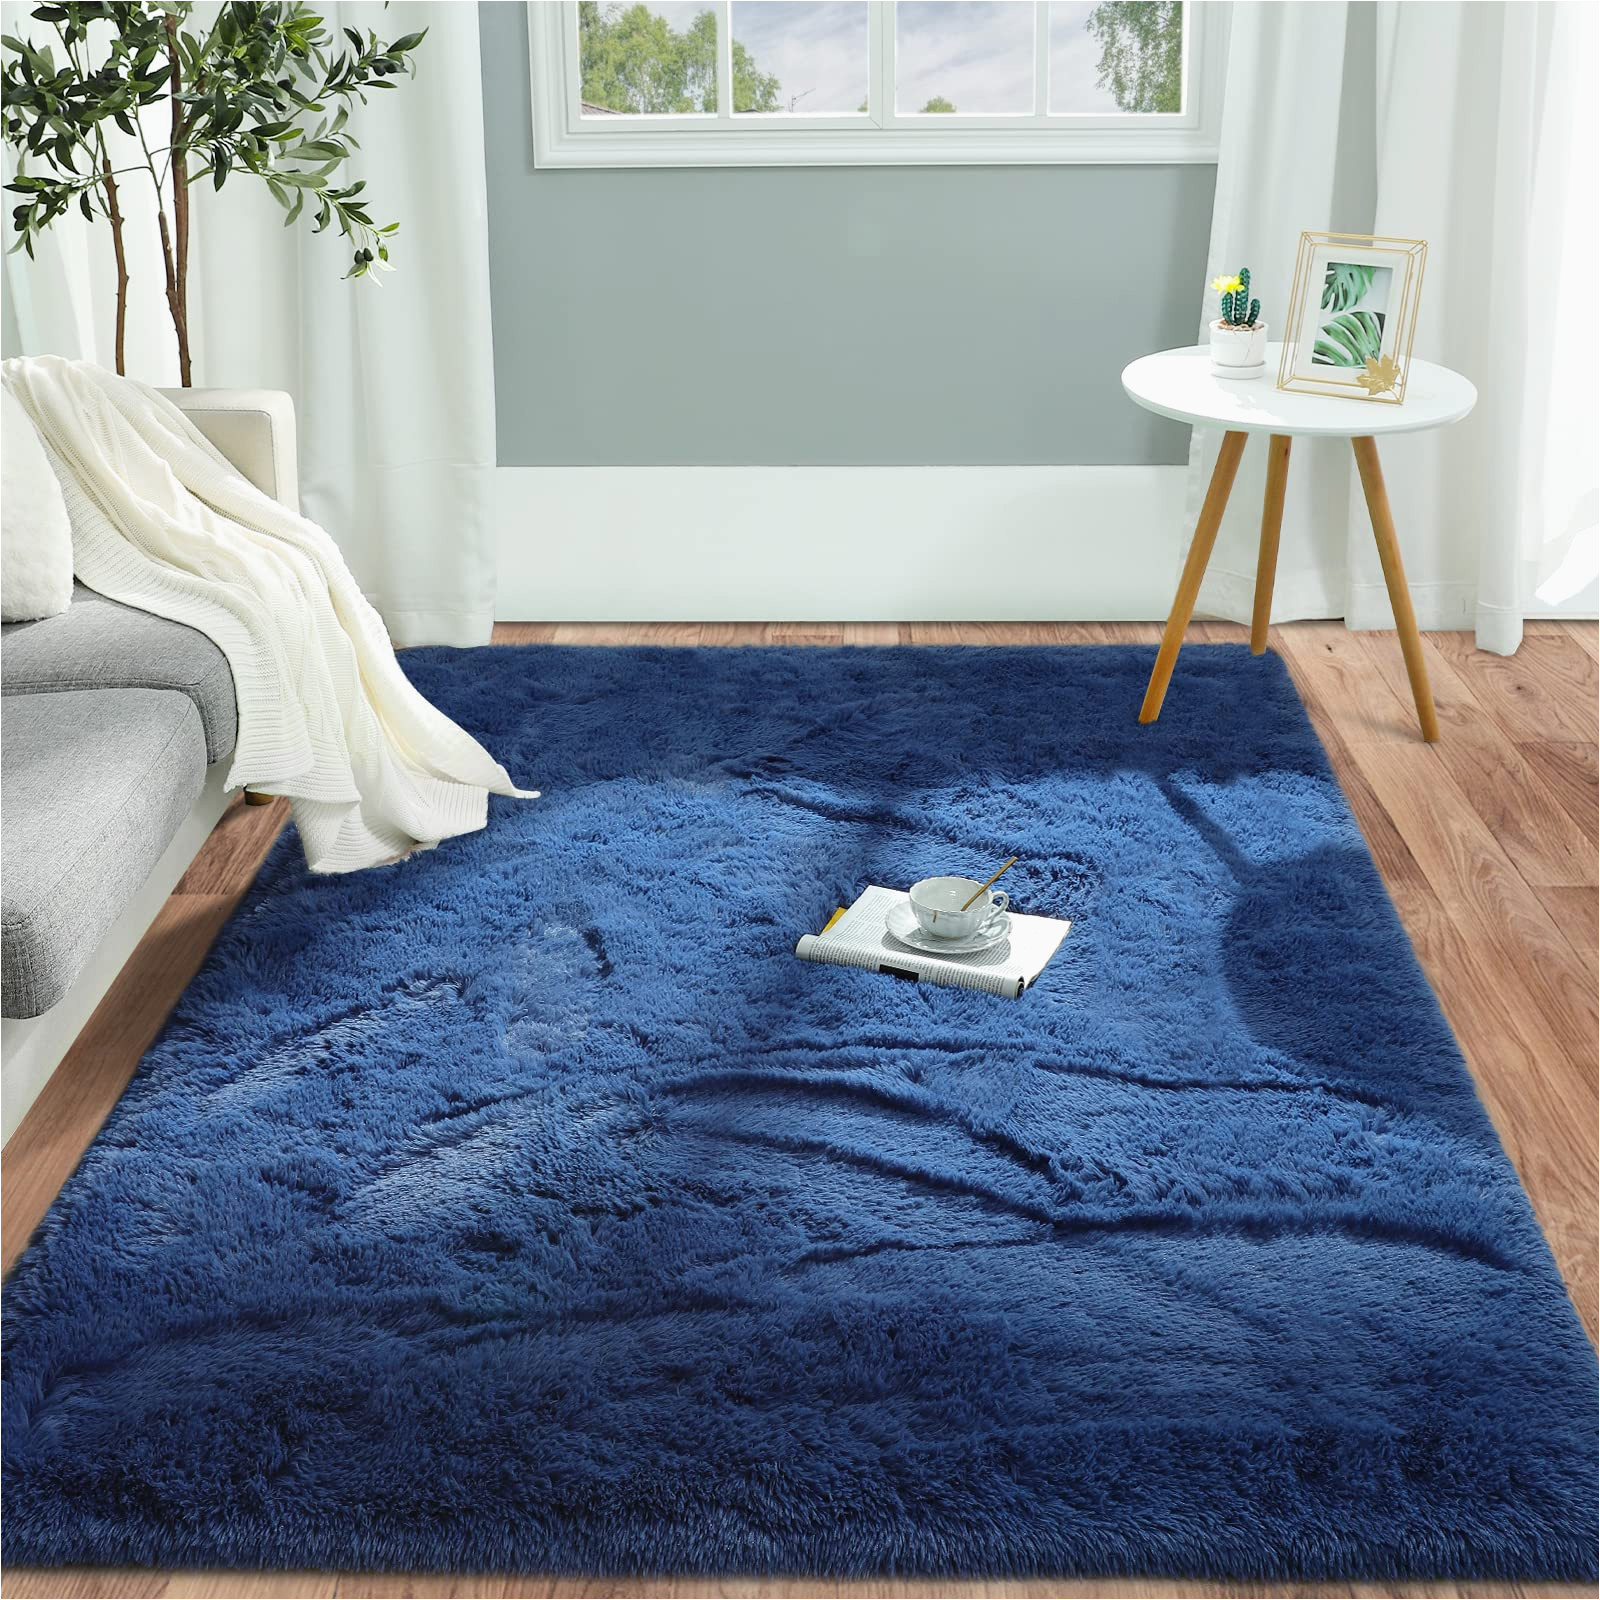 Blue area Rugs 3×5 Pettop Fluffy Shaggy area Rugs for Girls Bedroom,3×5 Feet soft Navy Blue Kids Room Rugs, Non-slip Carpet for Boys Bedroom, Small Bedside Rug, Nursery …